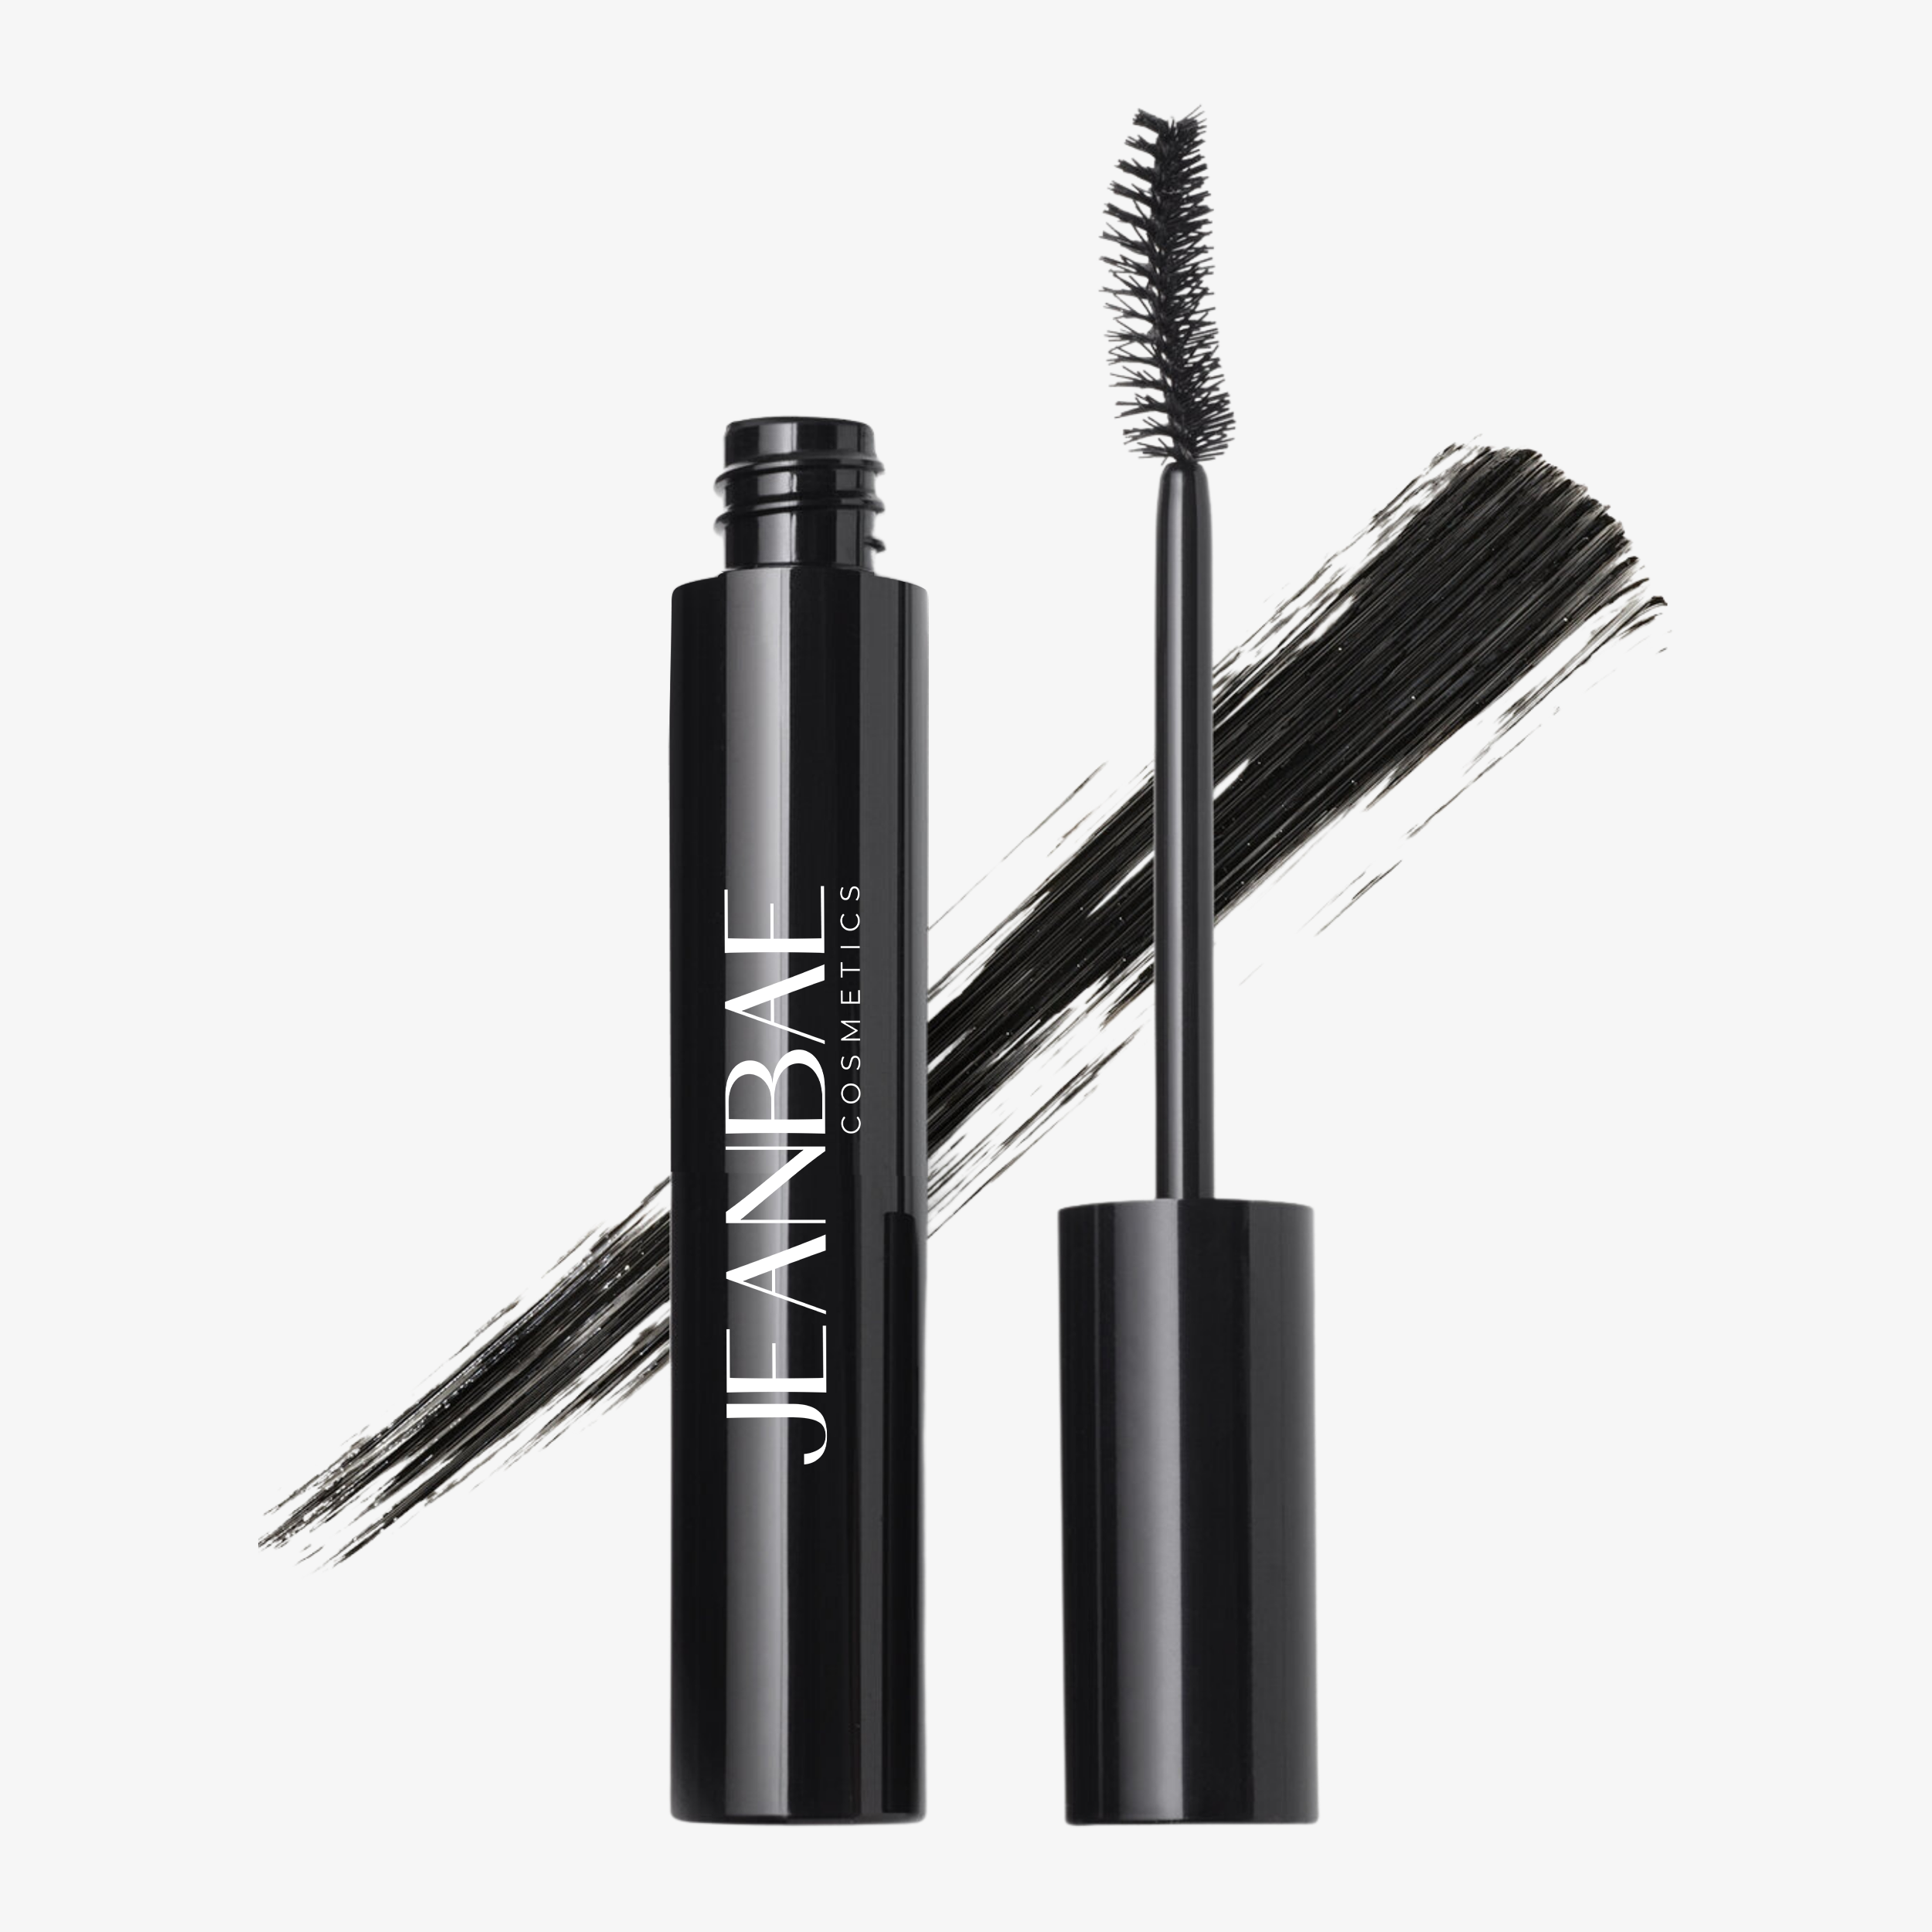 Maximizing lashes with this advanced formula imparts extreme volume, separation, length, lift, and defined lashes.  THIS PRODUCT IS Cruelty-Free, Vegan Friendly, Sephora Clean, Prop 65 Compliant, RSPO, E.U. Registered, and Made in the USA. Formulated without Alcohol, Barley, Corn, Oats, Rye, Silicones, Soy, Spelt or Talc. Free Of Parabens, Gluten, Phthalates, and Sulfates.